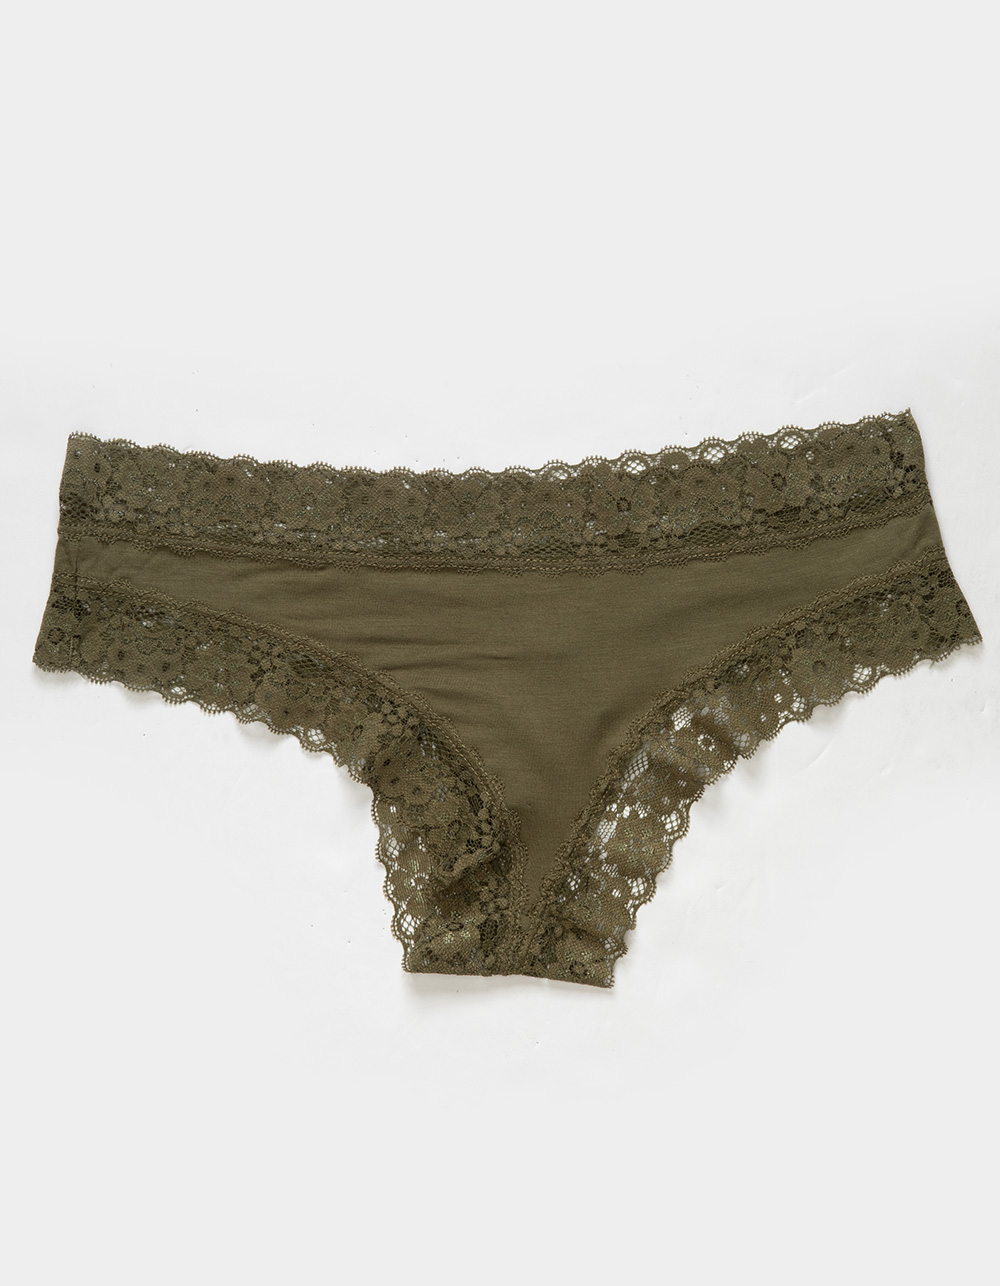 LOVE LIBBY Lace Trim Cheeky Panties - OLIVE